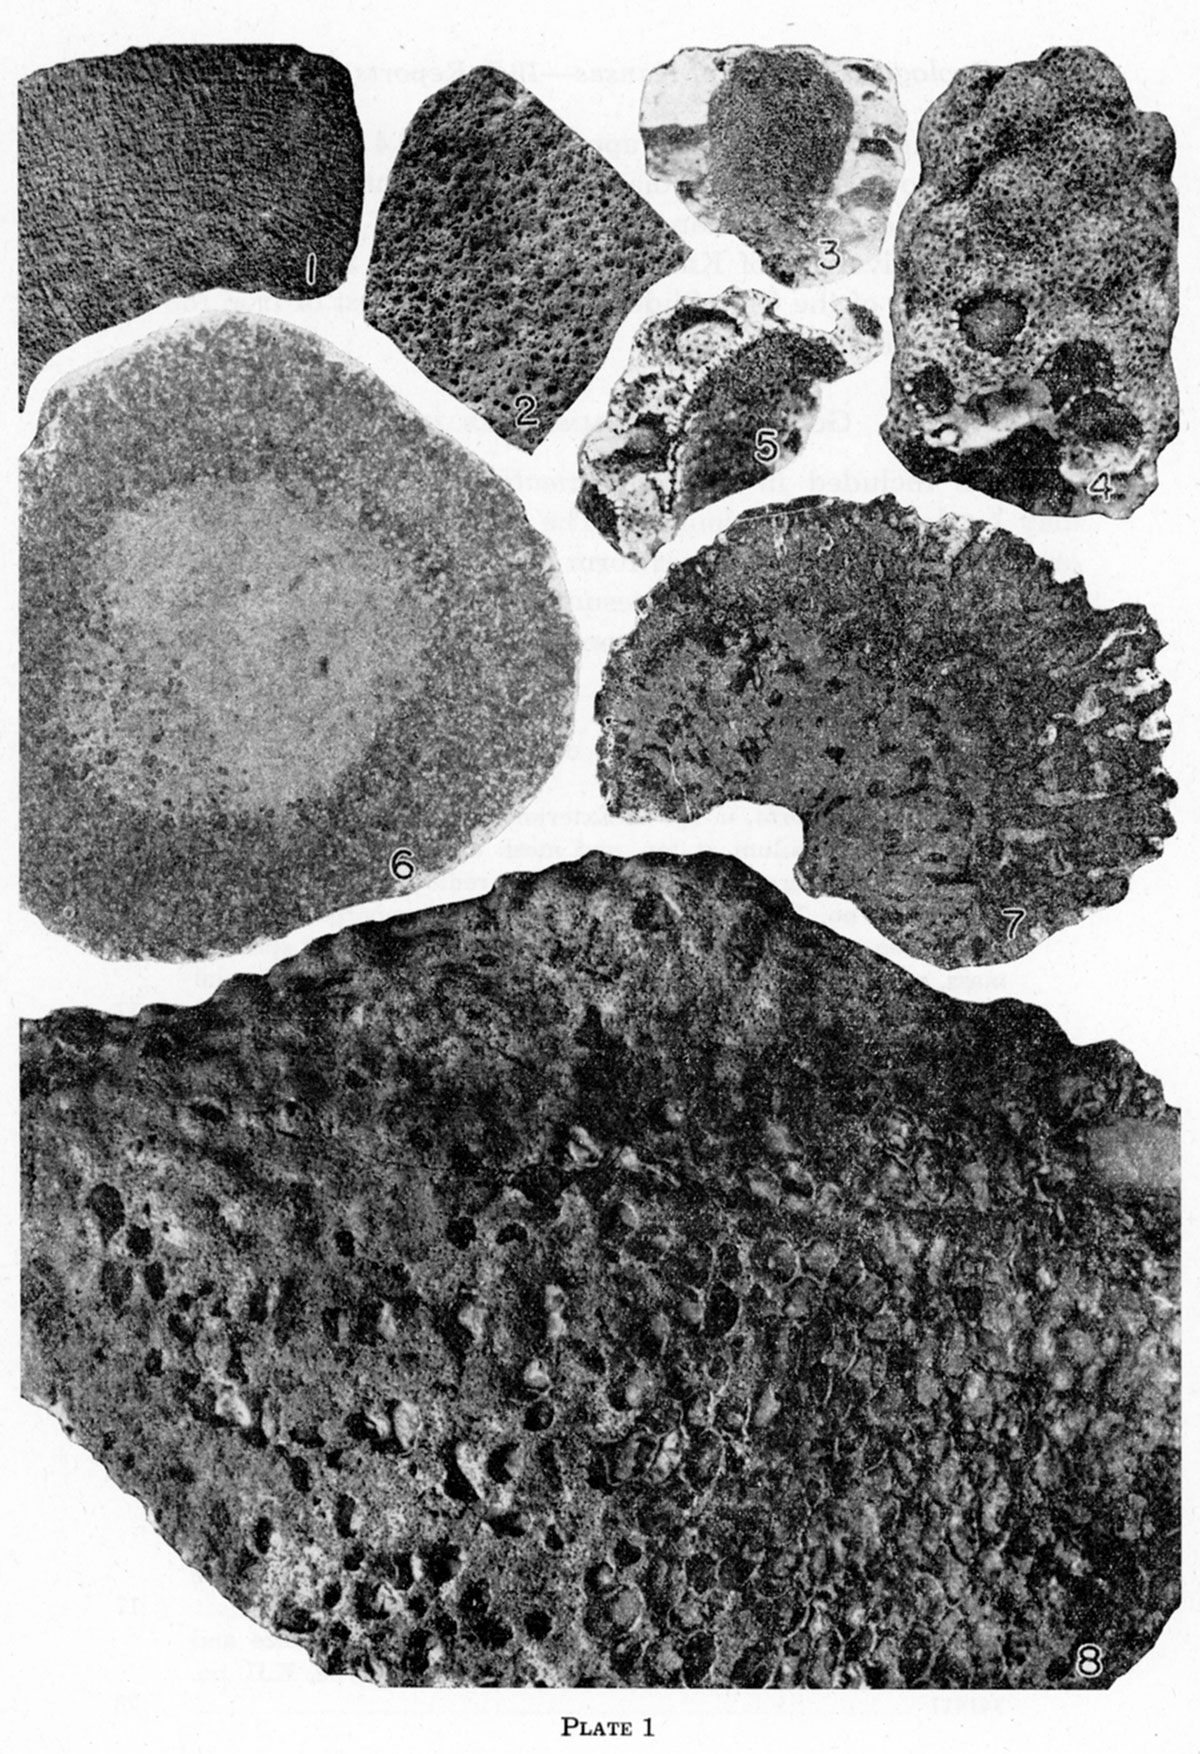 Black and white photos of fossils, Plate 1.